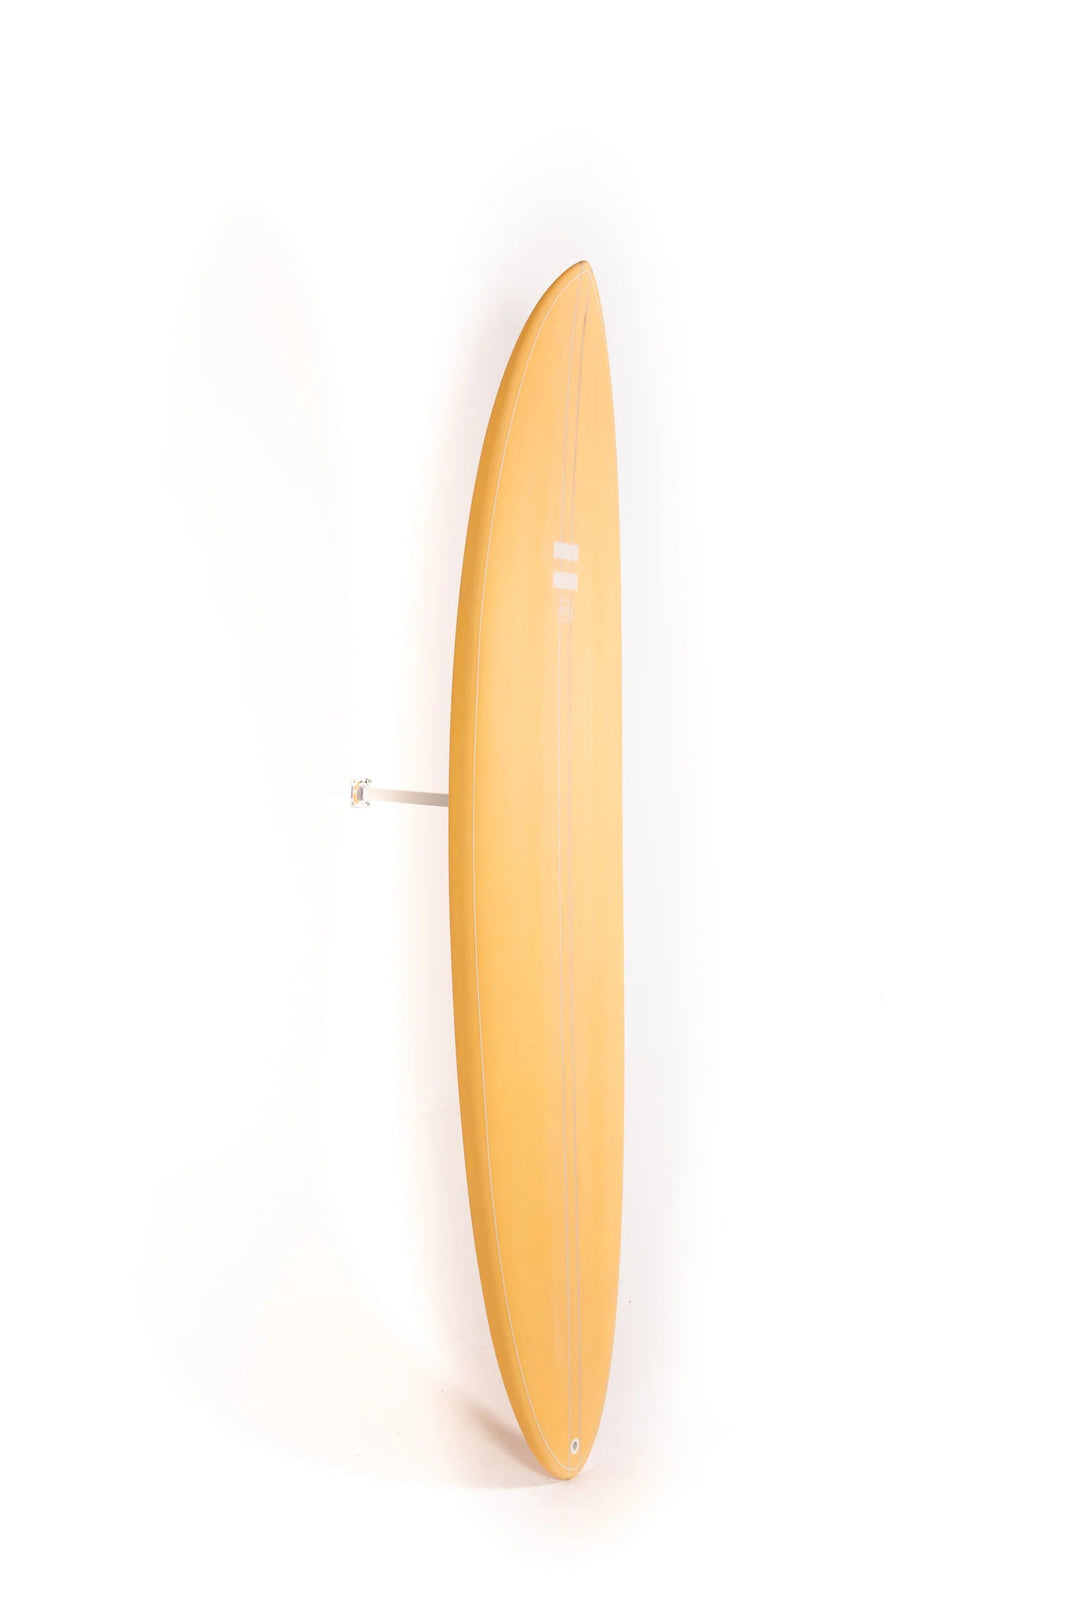 Indio Surfboards The Egg 7'6" - Toasted